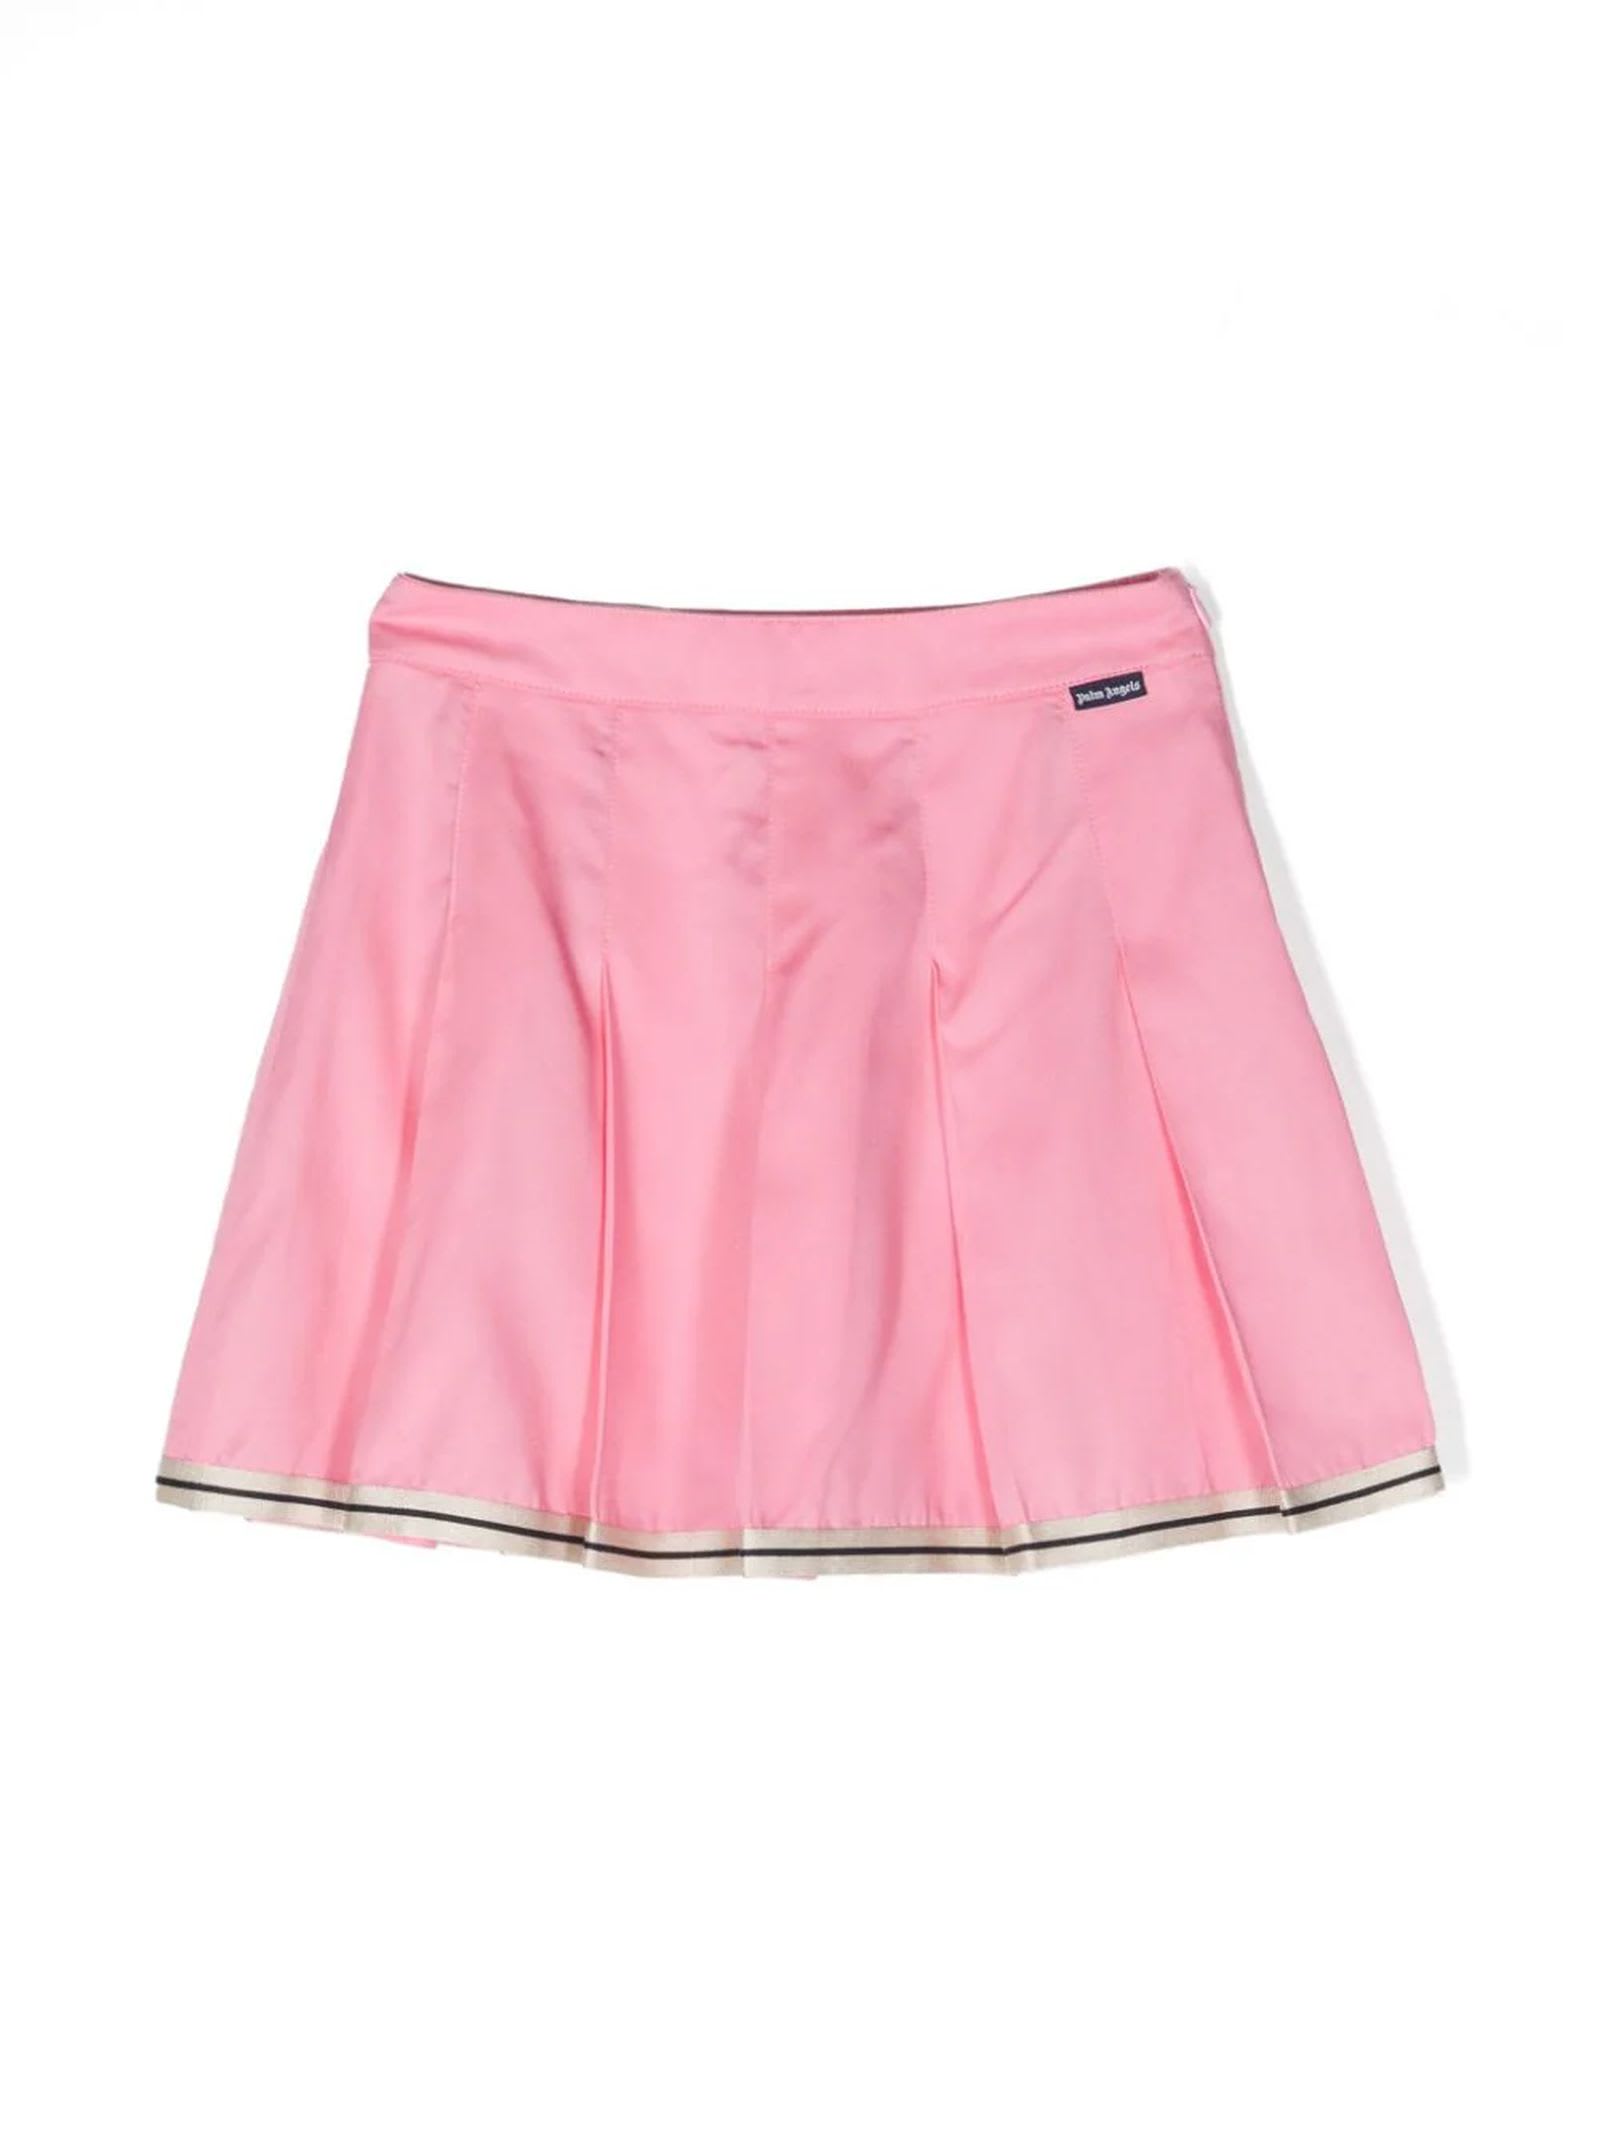 Palm Angels Skirts Pink